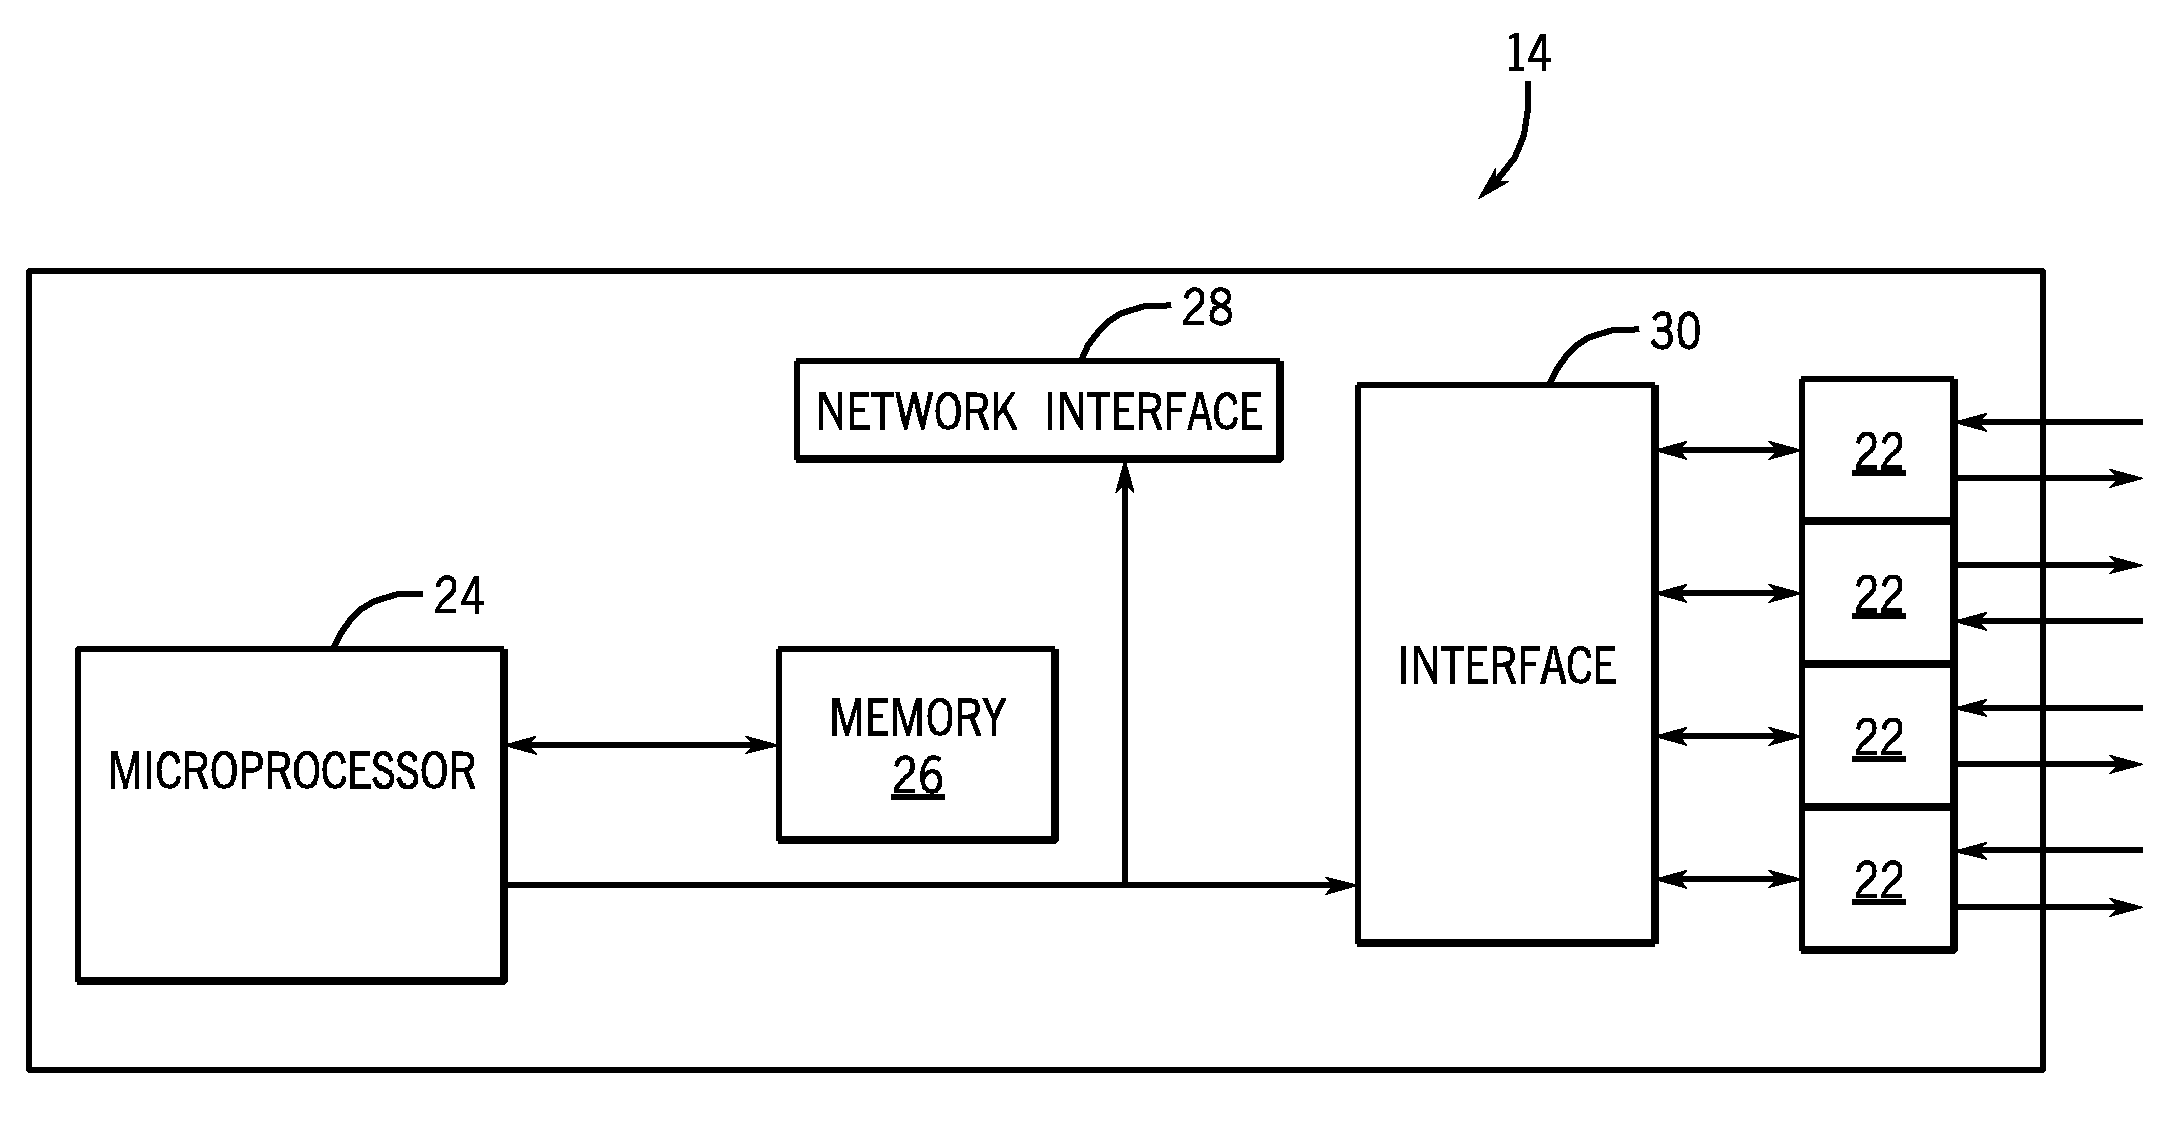 Stackable I/O modules appearing as standard USB mass storage devices